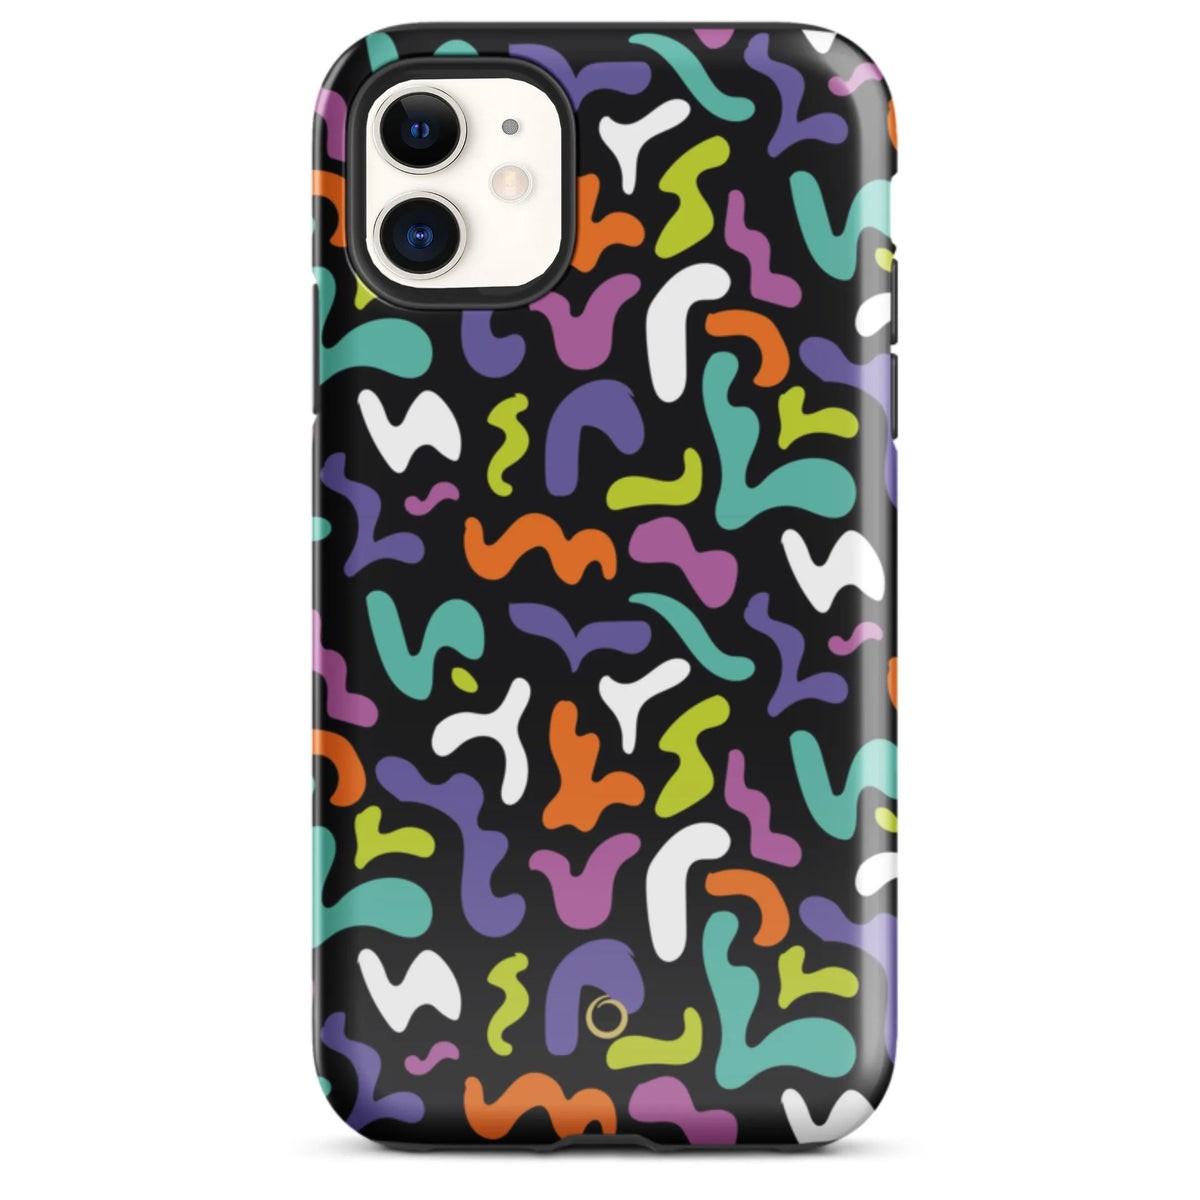 Chromatic Bliss iPhone Case - iPhone 11